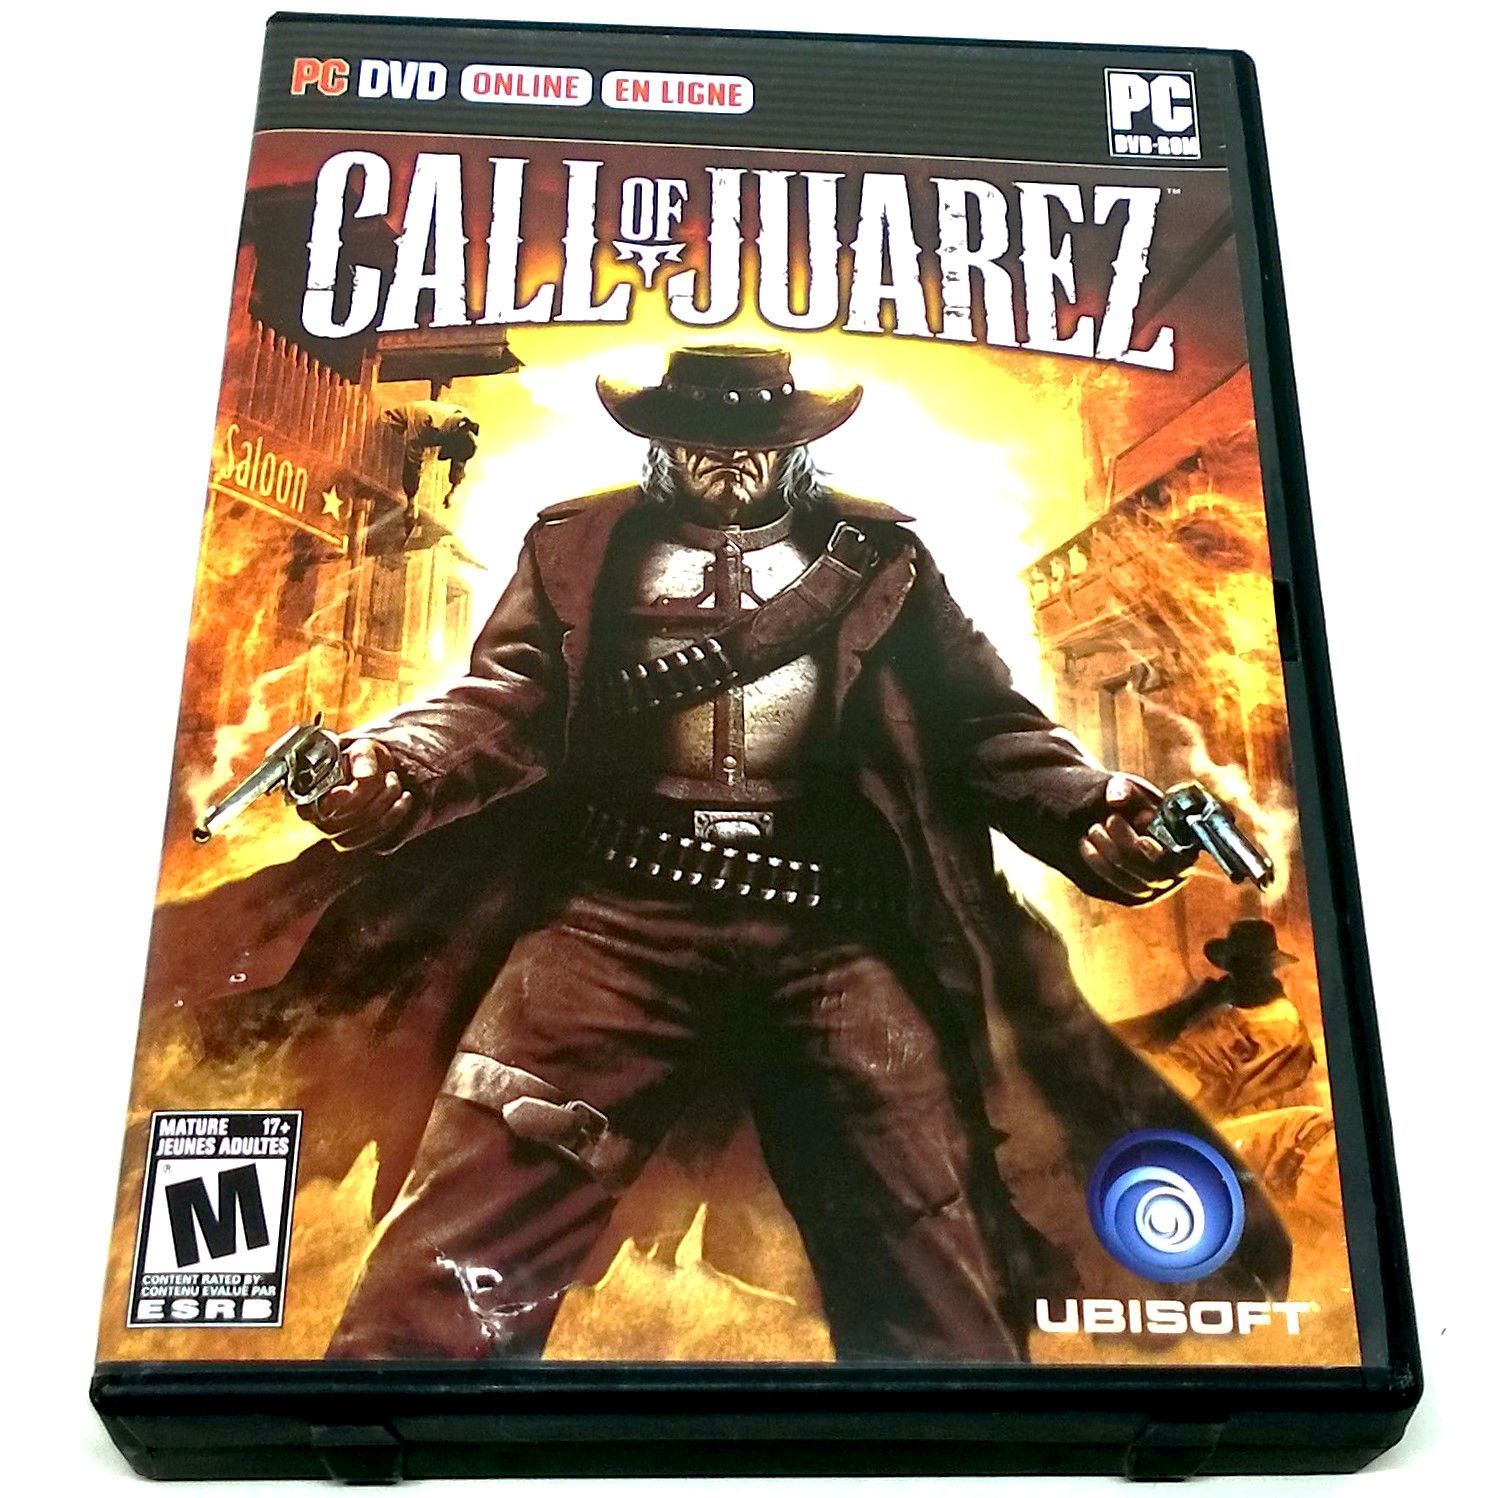 Call of Juarez for PC DVD-ROM - Front of case